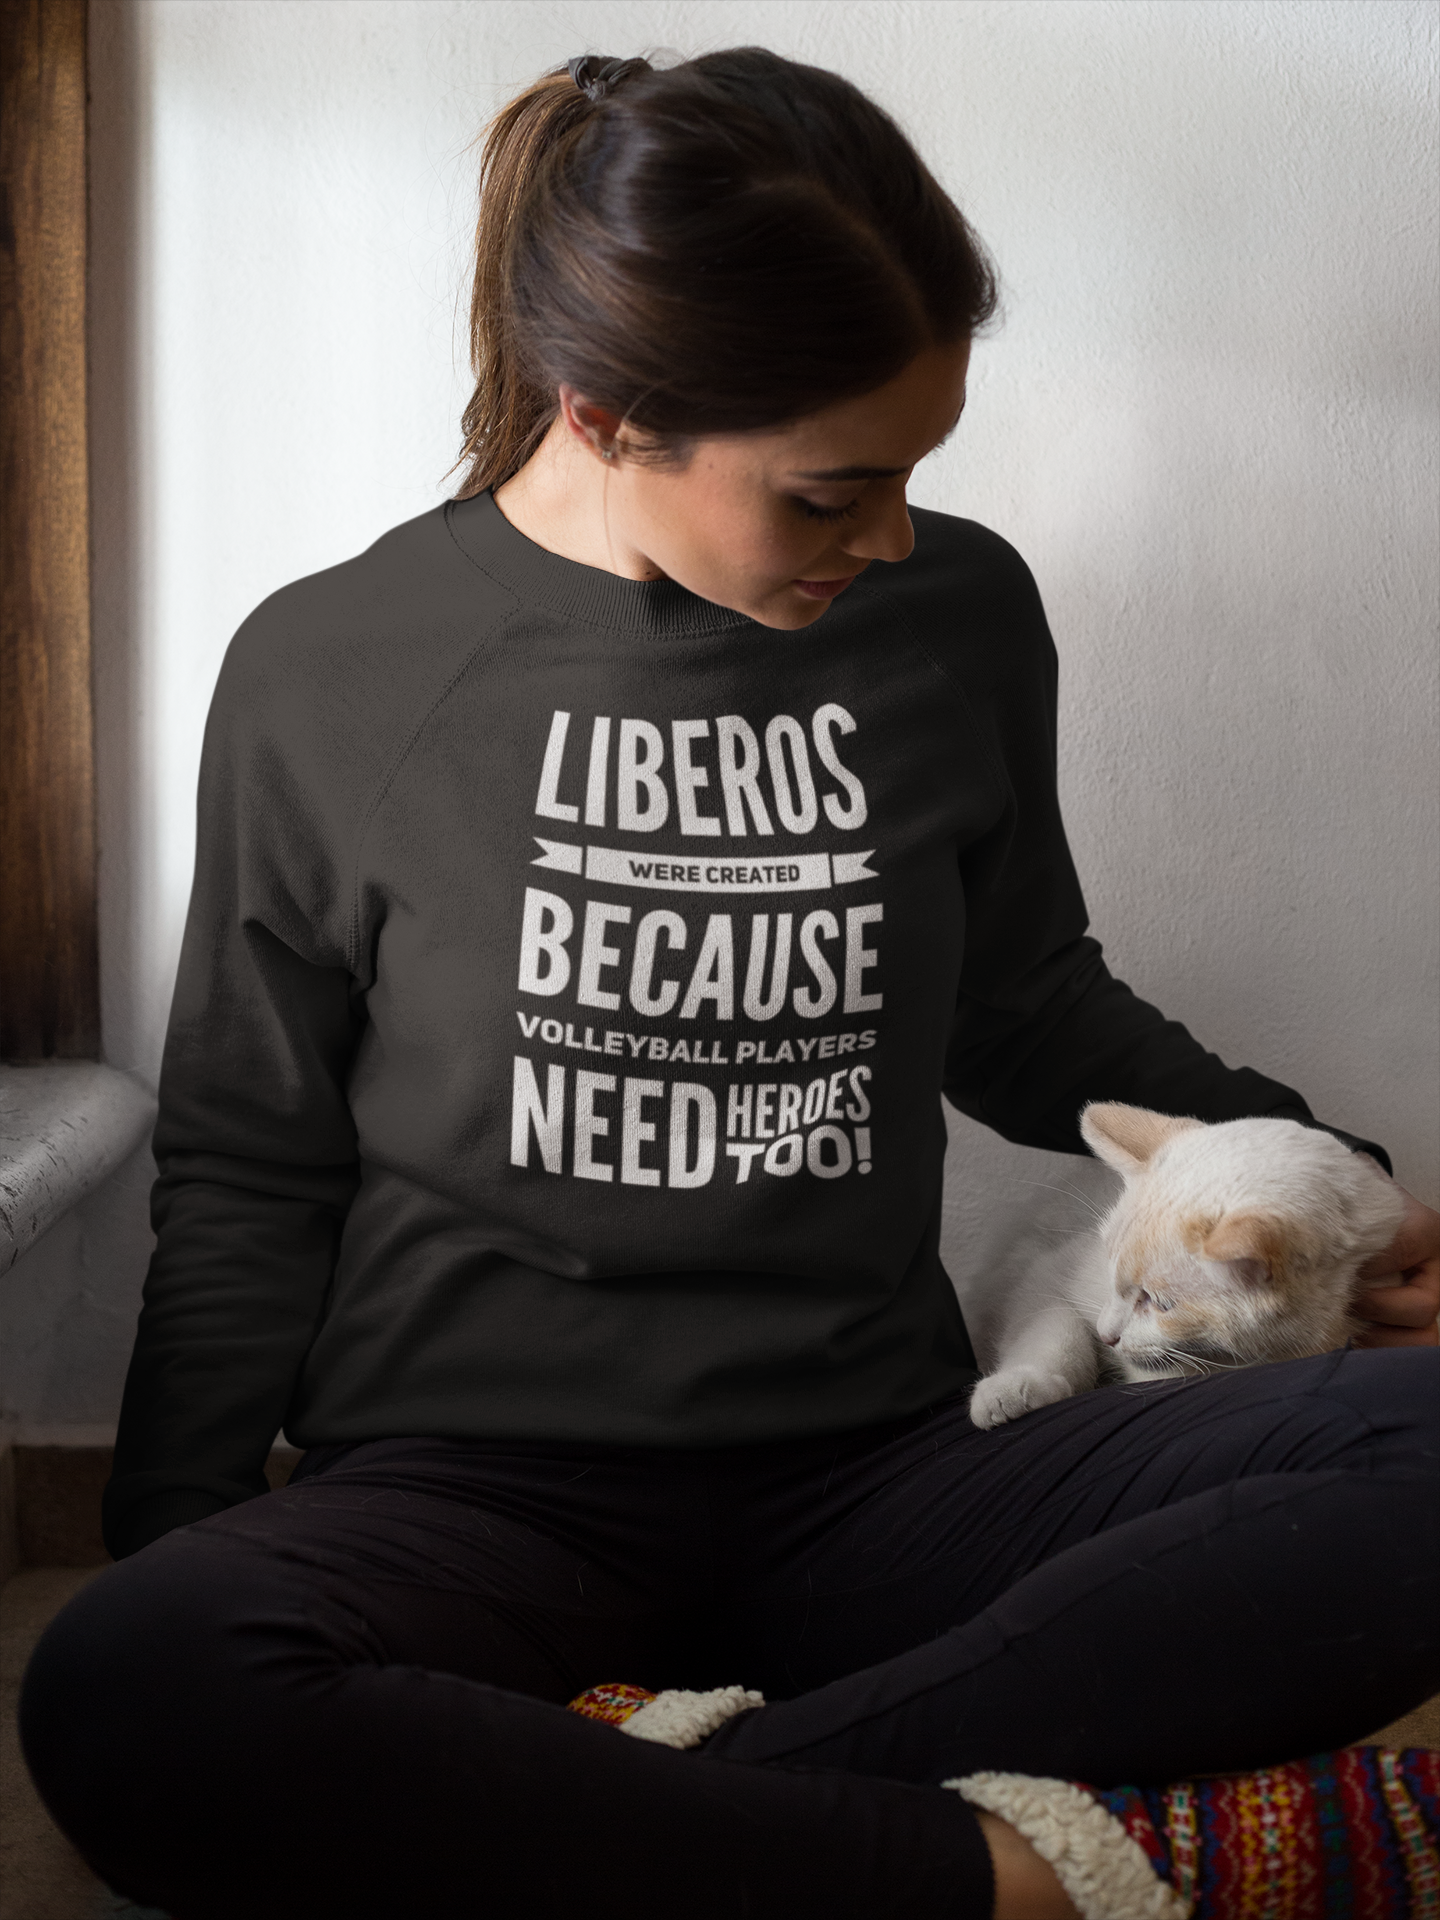 Your Volleyball Shirt By Volleybragswag - Liberos Were Created Because Volleyball Players Need Heroes Too! Shop this volleyball shirt on The Coolest Volleyball Shirt Shop on ETSY.